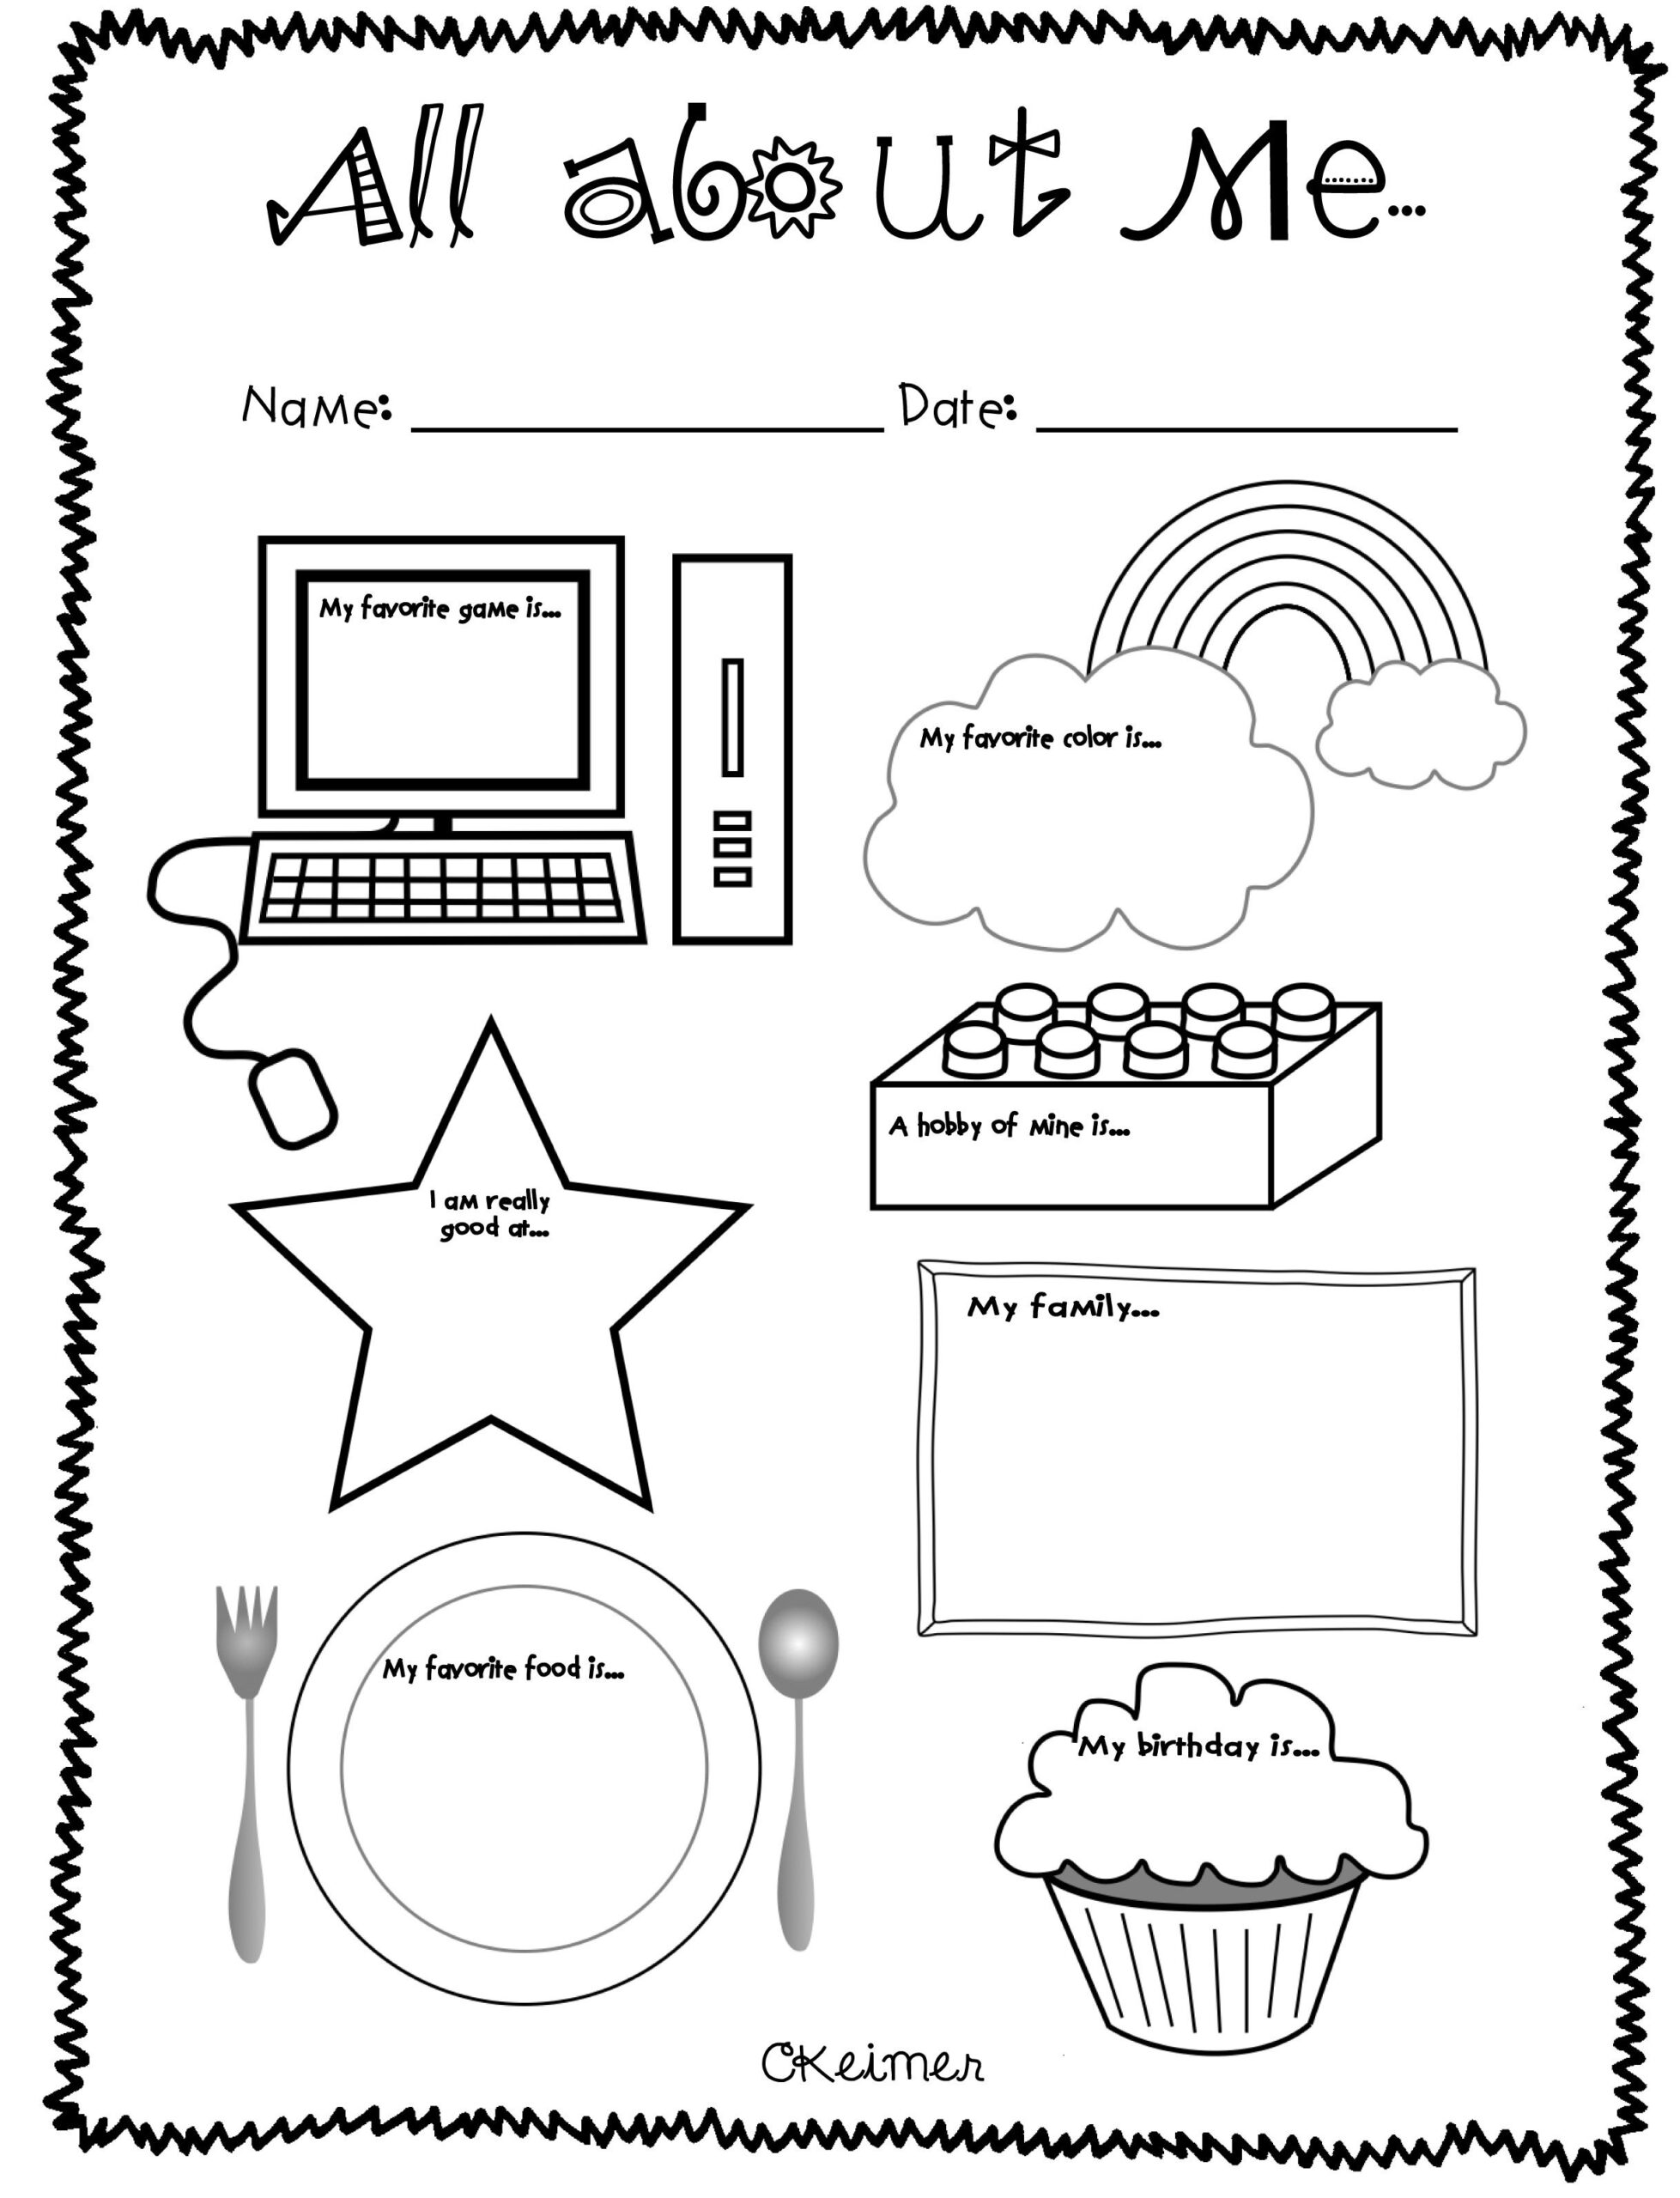 get-to-know-me-worksheet-kids-all-about-me-worksheets